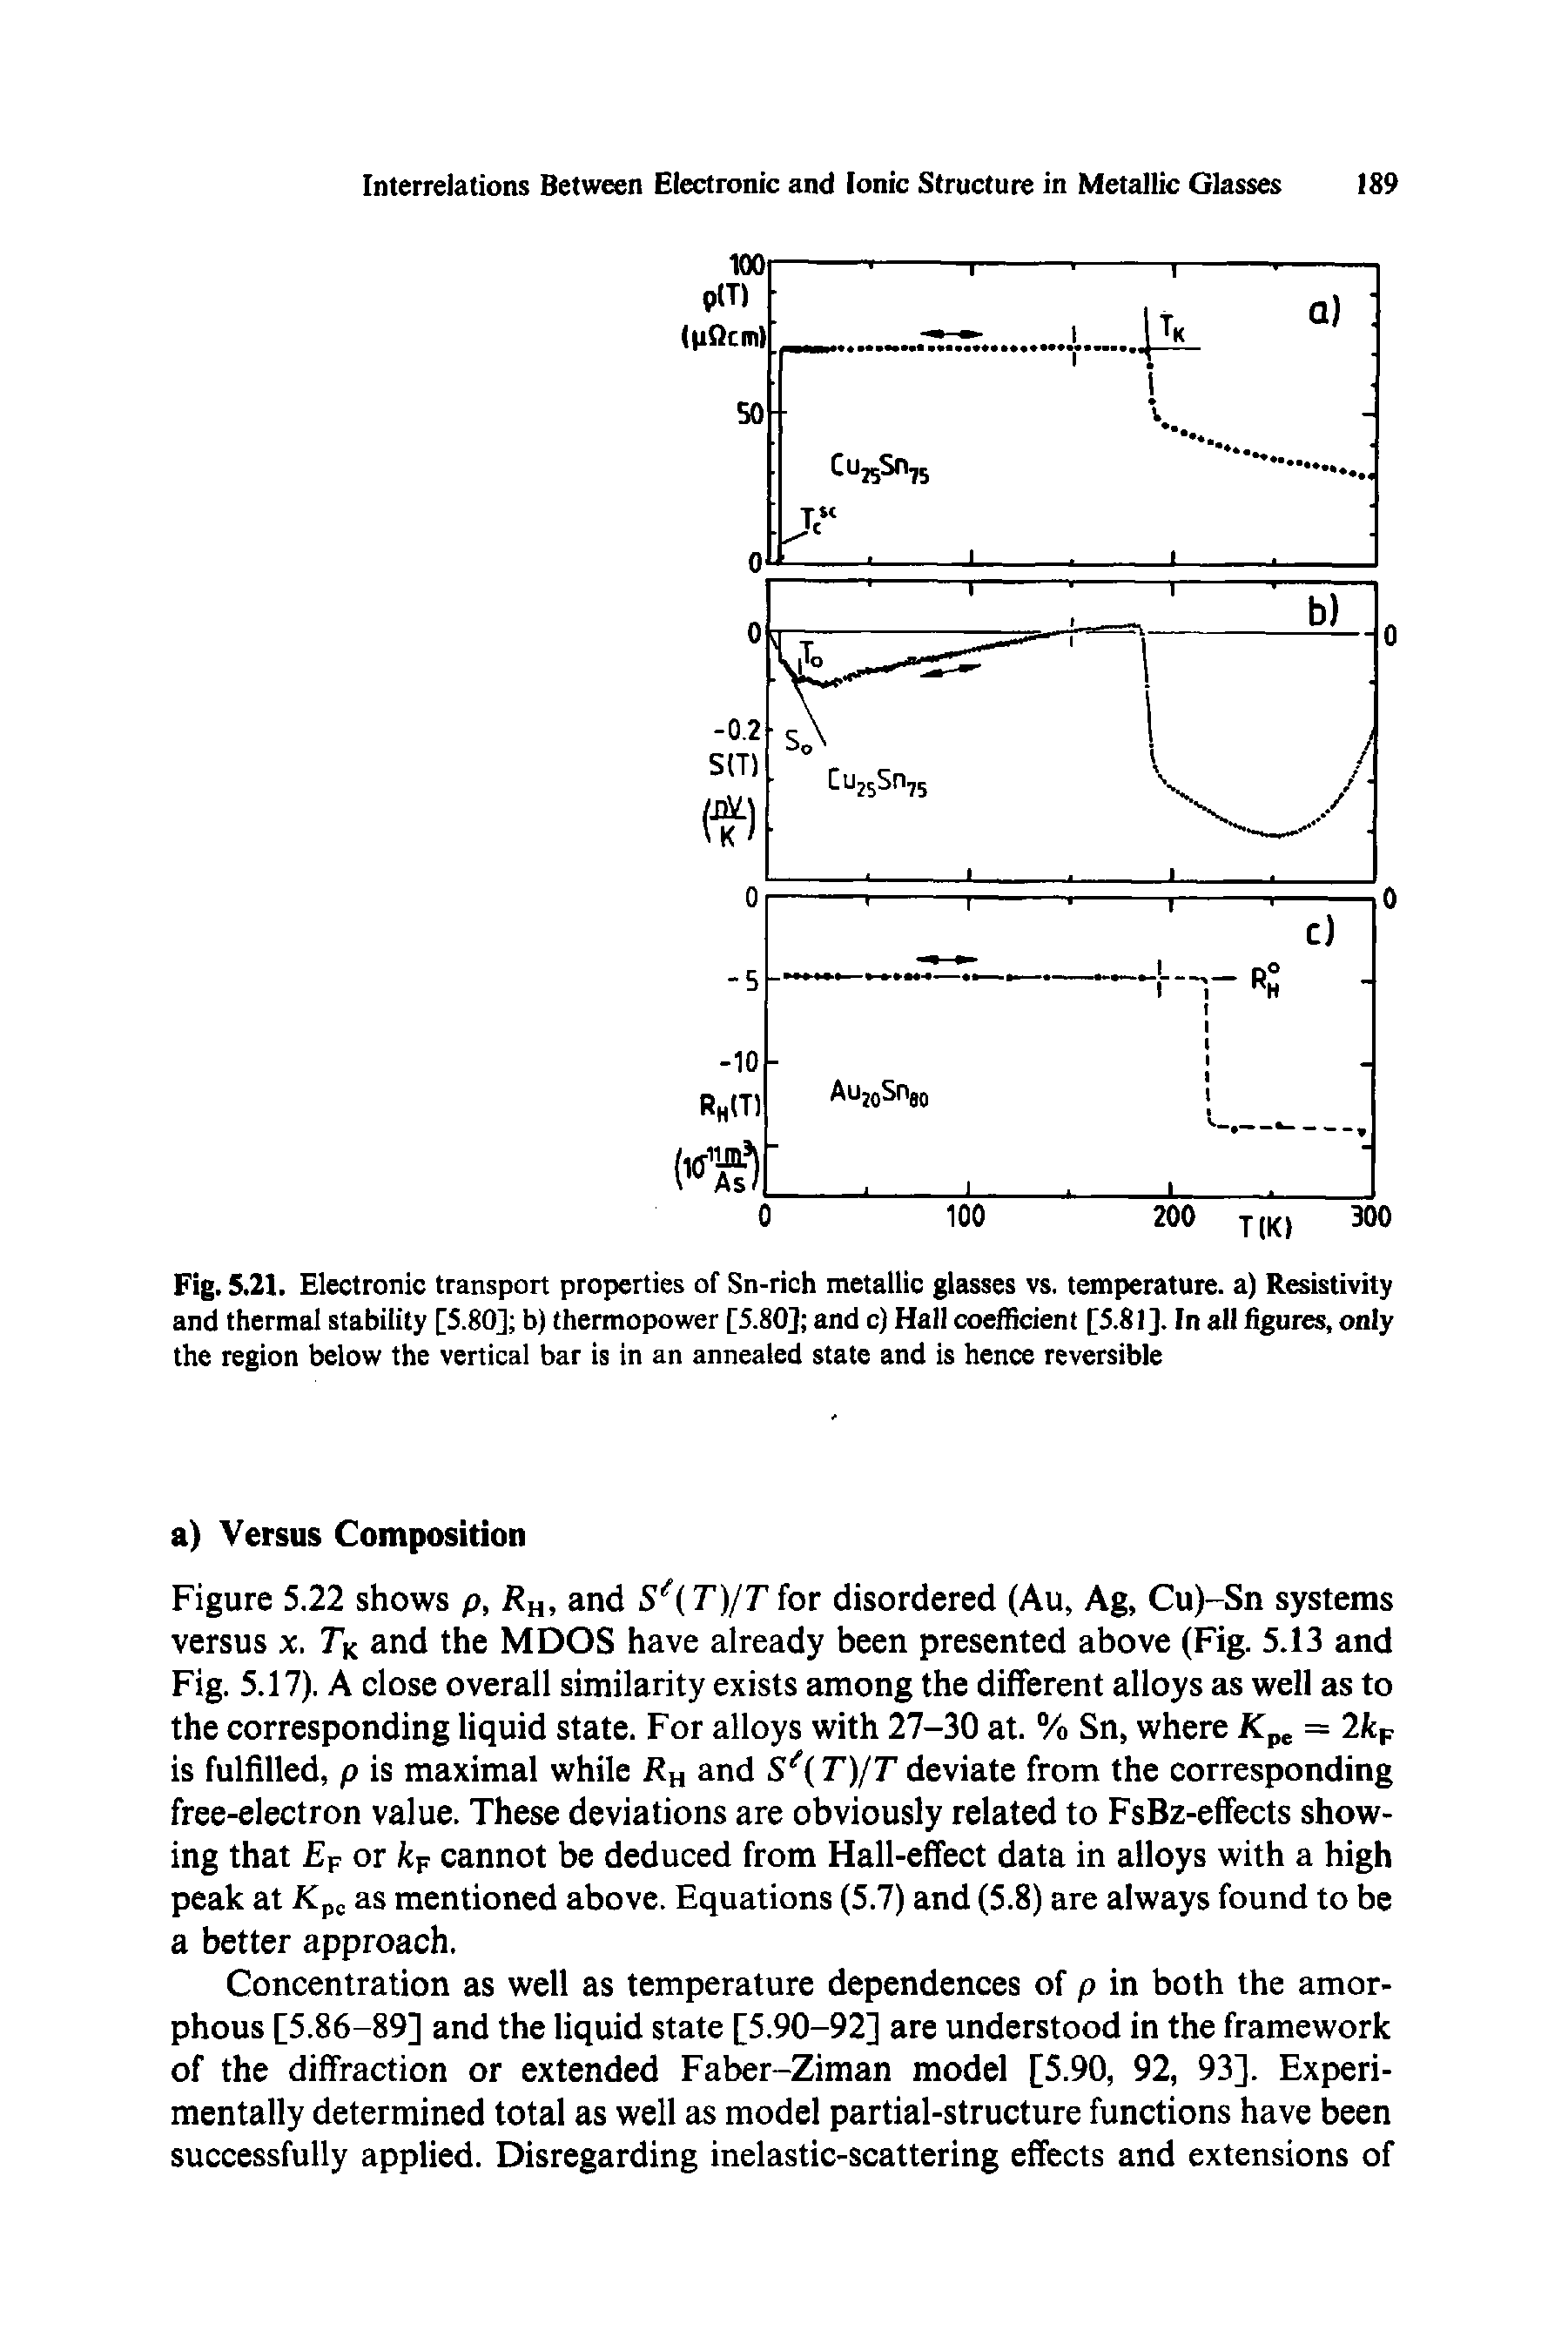 Fig. 5.21. Electronic transport properties of Sn-rich metallic glasses vs. temperature, a) Resistivity and thermal stability [5.80] b) thermopower [5.80] and c) Hall coefficient [5.81], In all figures, only the region below the vertical bar is in an annealed state and is hence reversible...